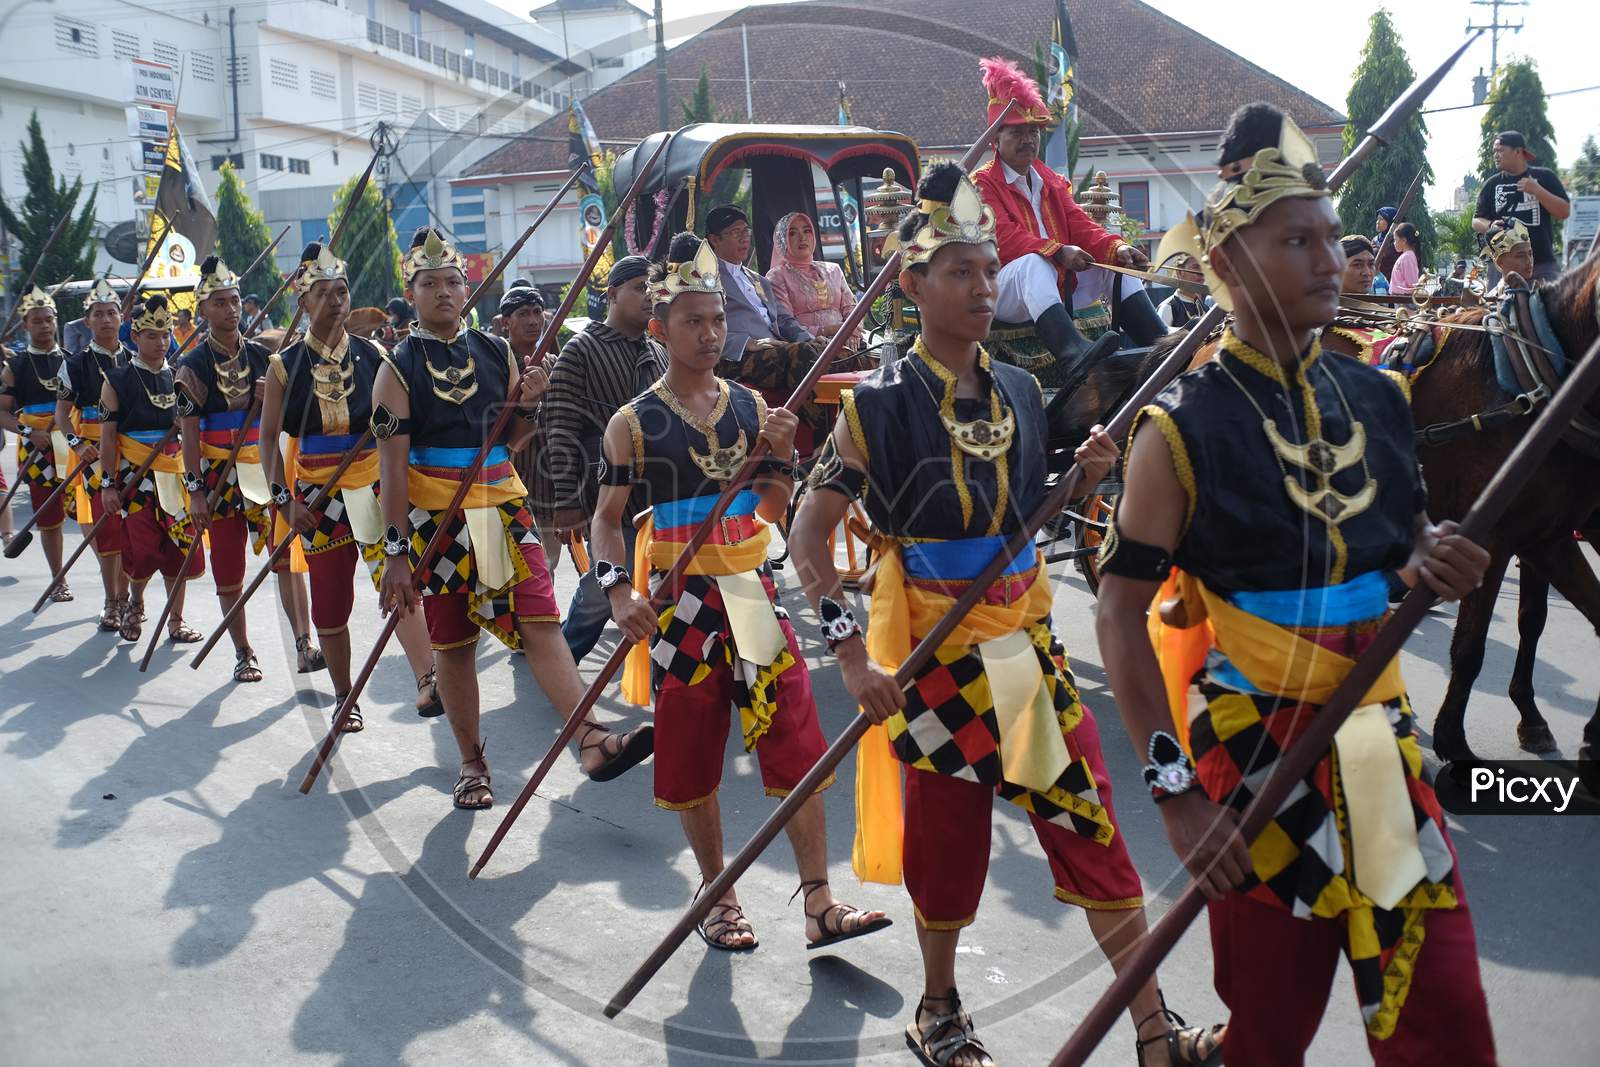 Bregada troops or royal warriors in the land of Java marched in the procession of the 1113th Anniversary of Magelang City